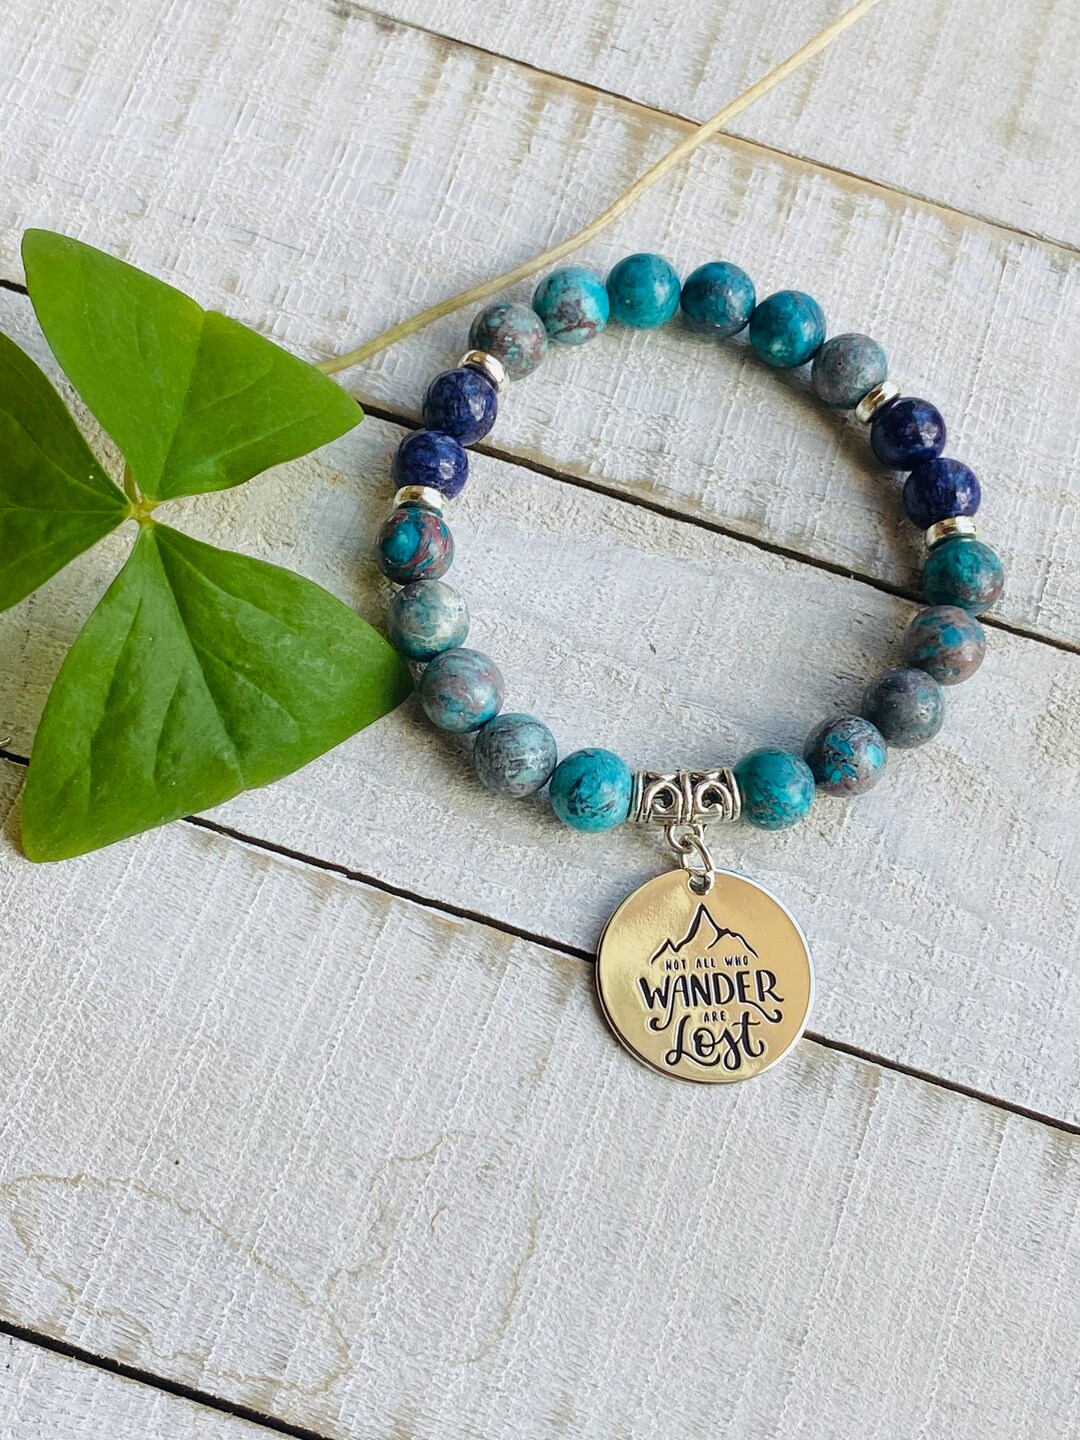 Not All Who Wander Are Lost Not All Who Wander Are Lost - Etsy